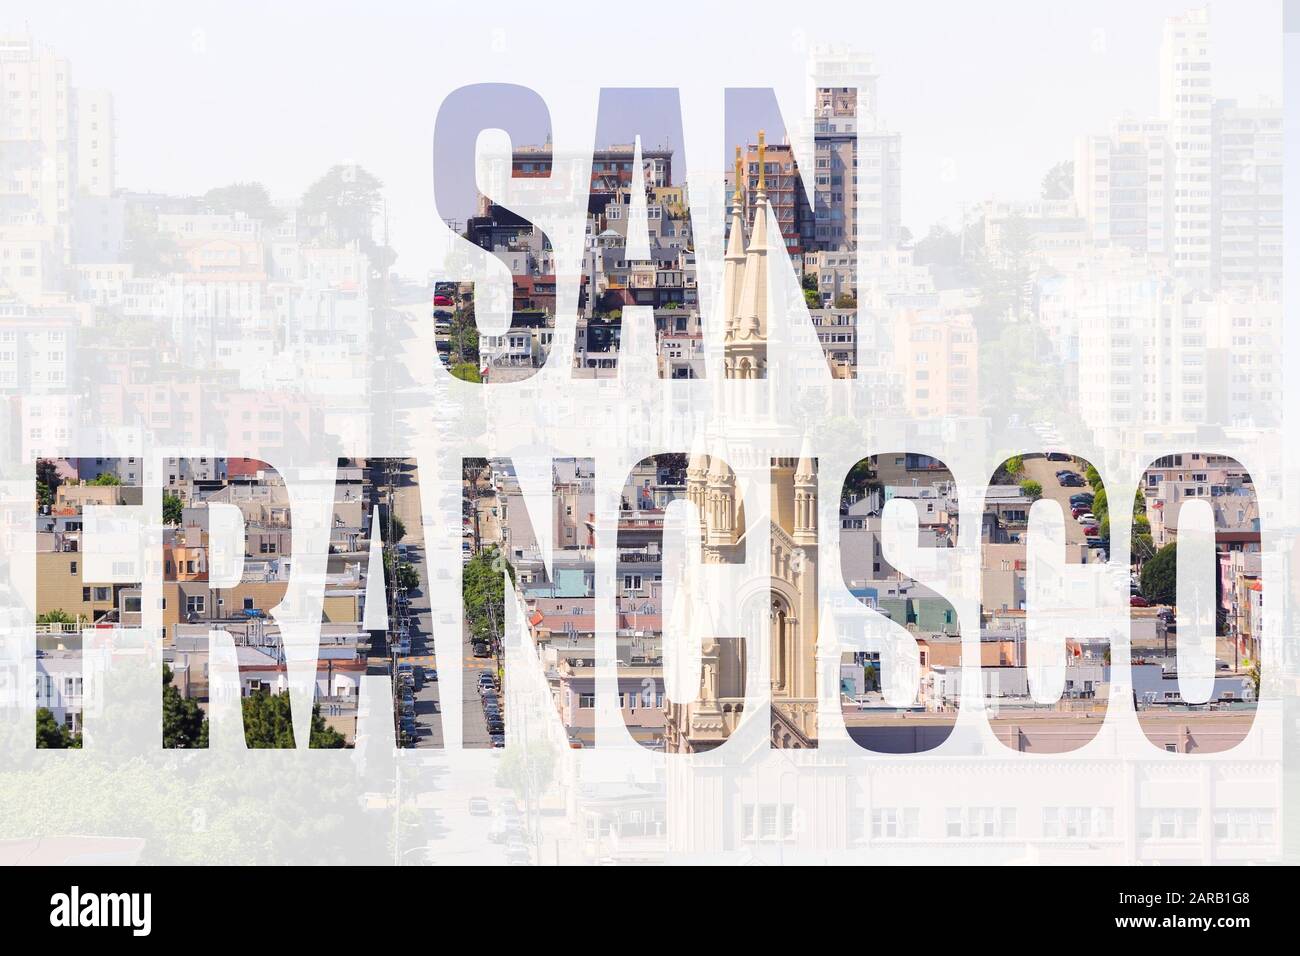 San Francisco, California - city name sign with photo in background. Stock Photo